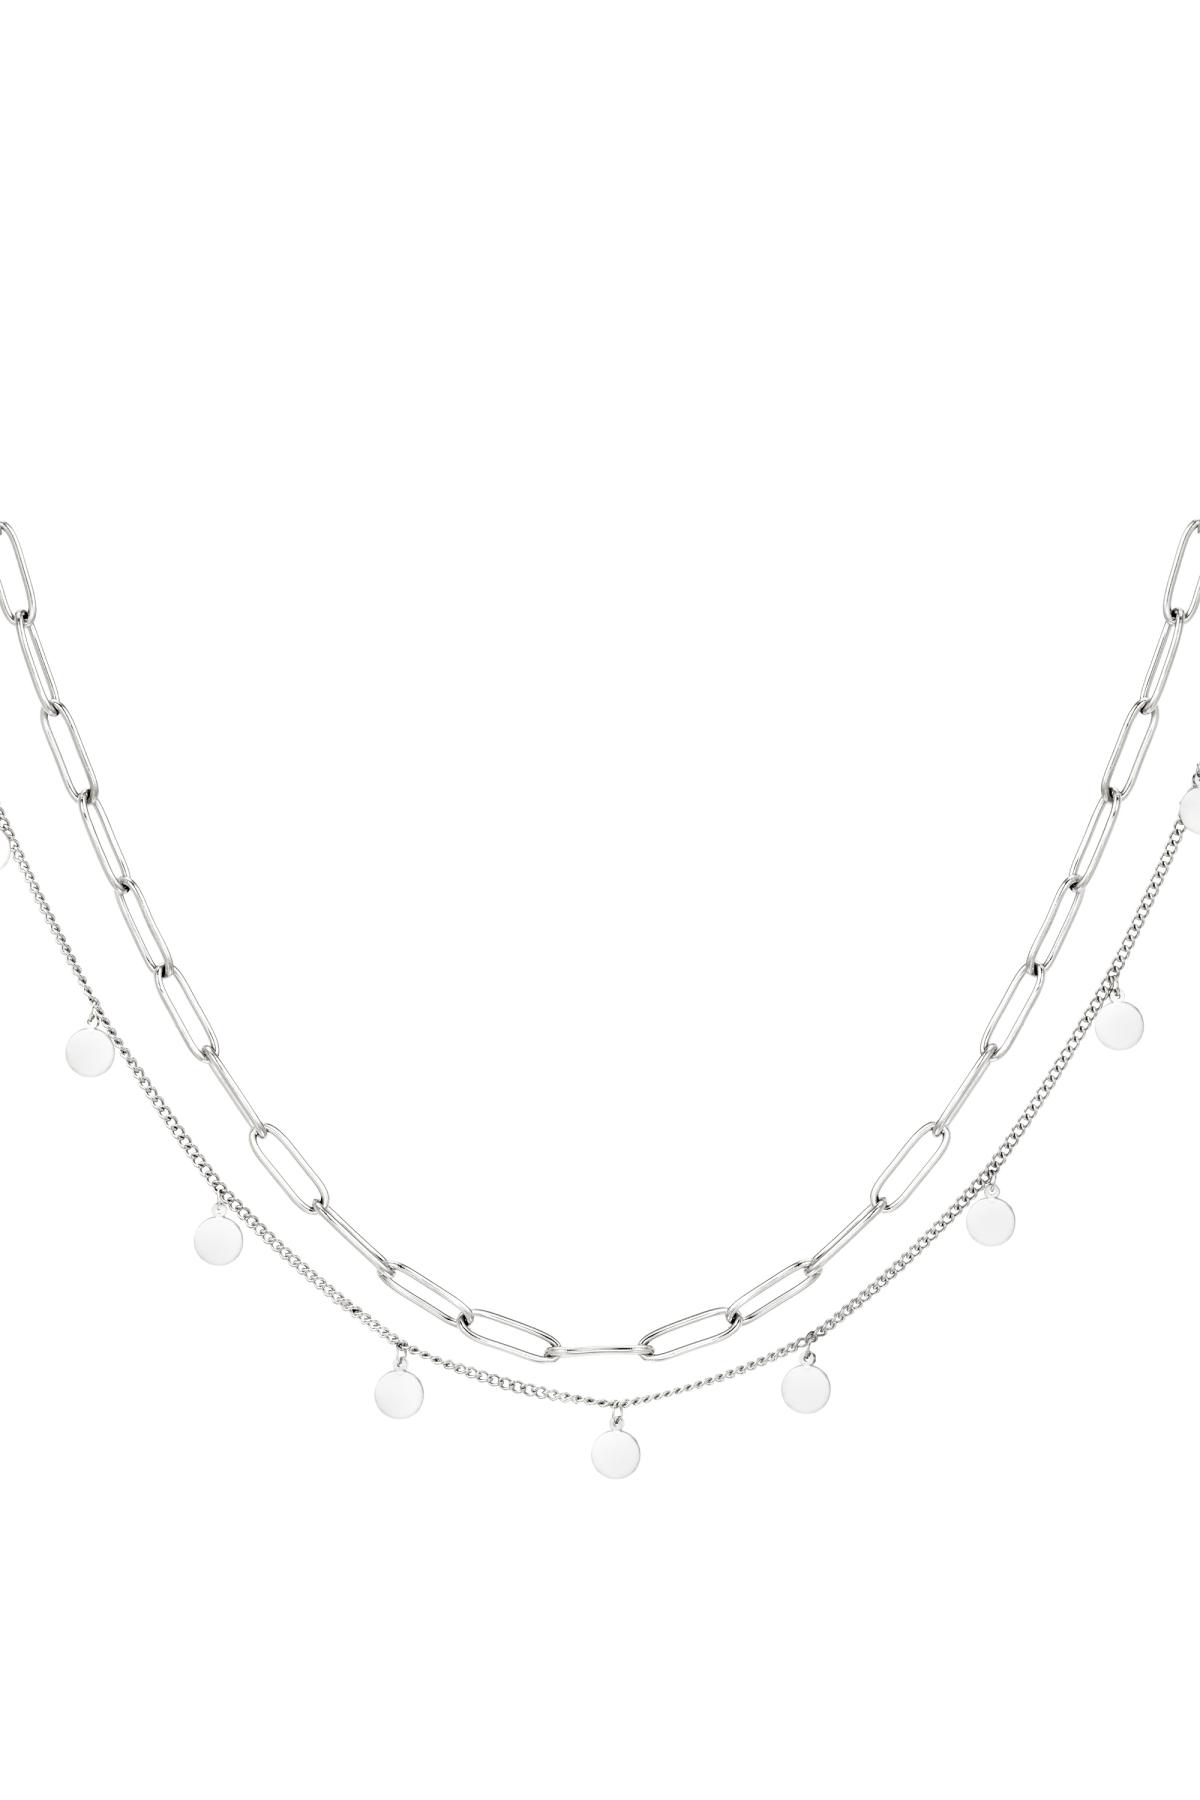 Silver / Double stainless steel necklace Silver 